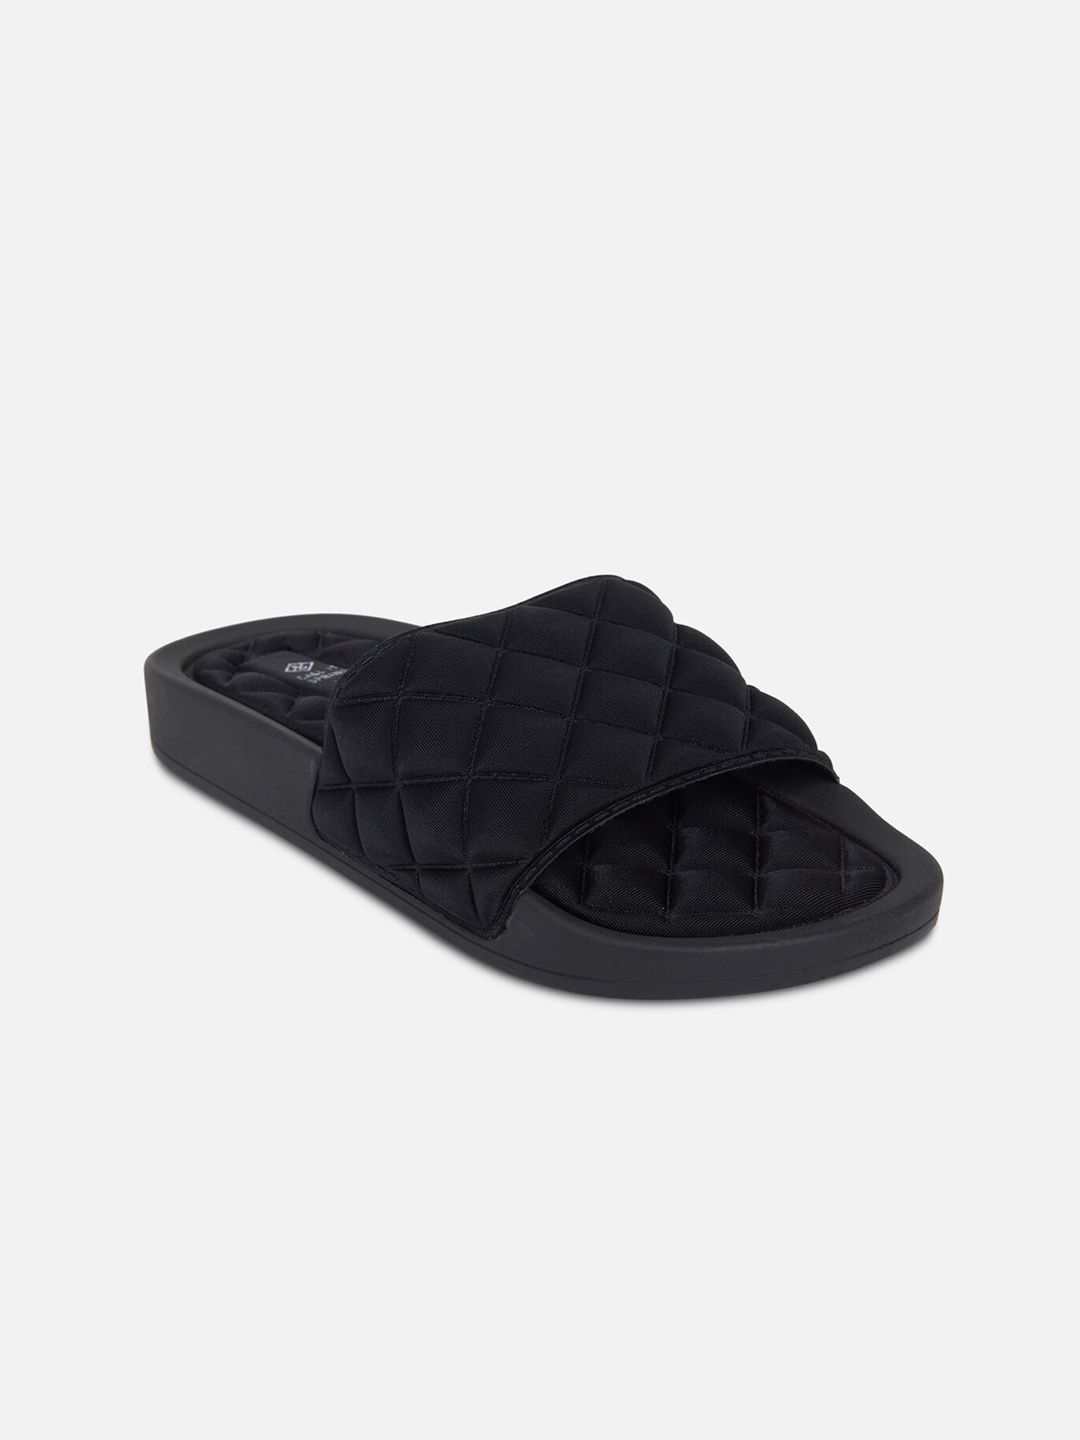 Call It Spring Women Black Solid Sliders Price in India